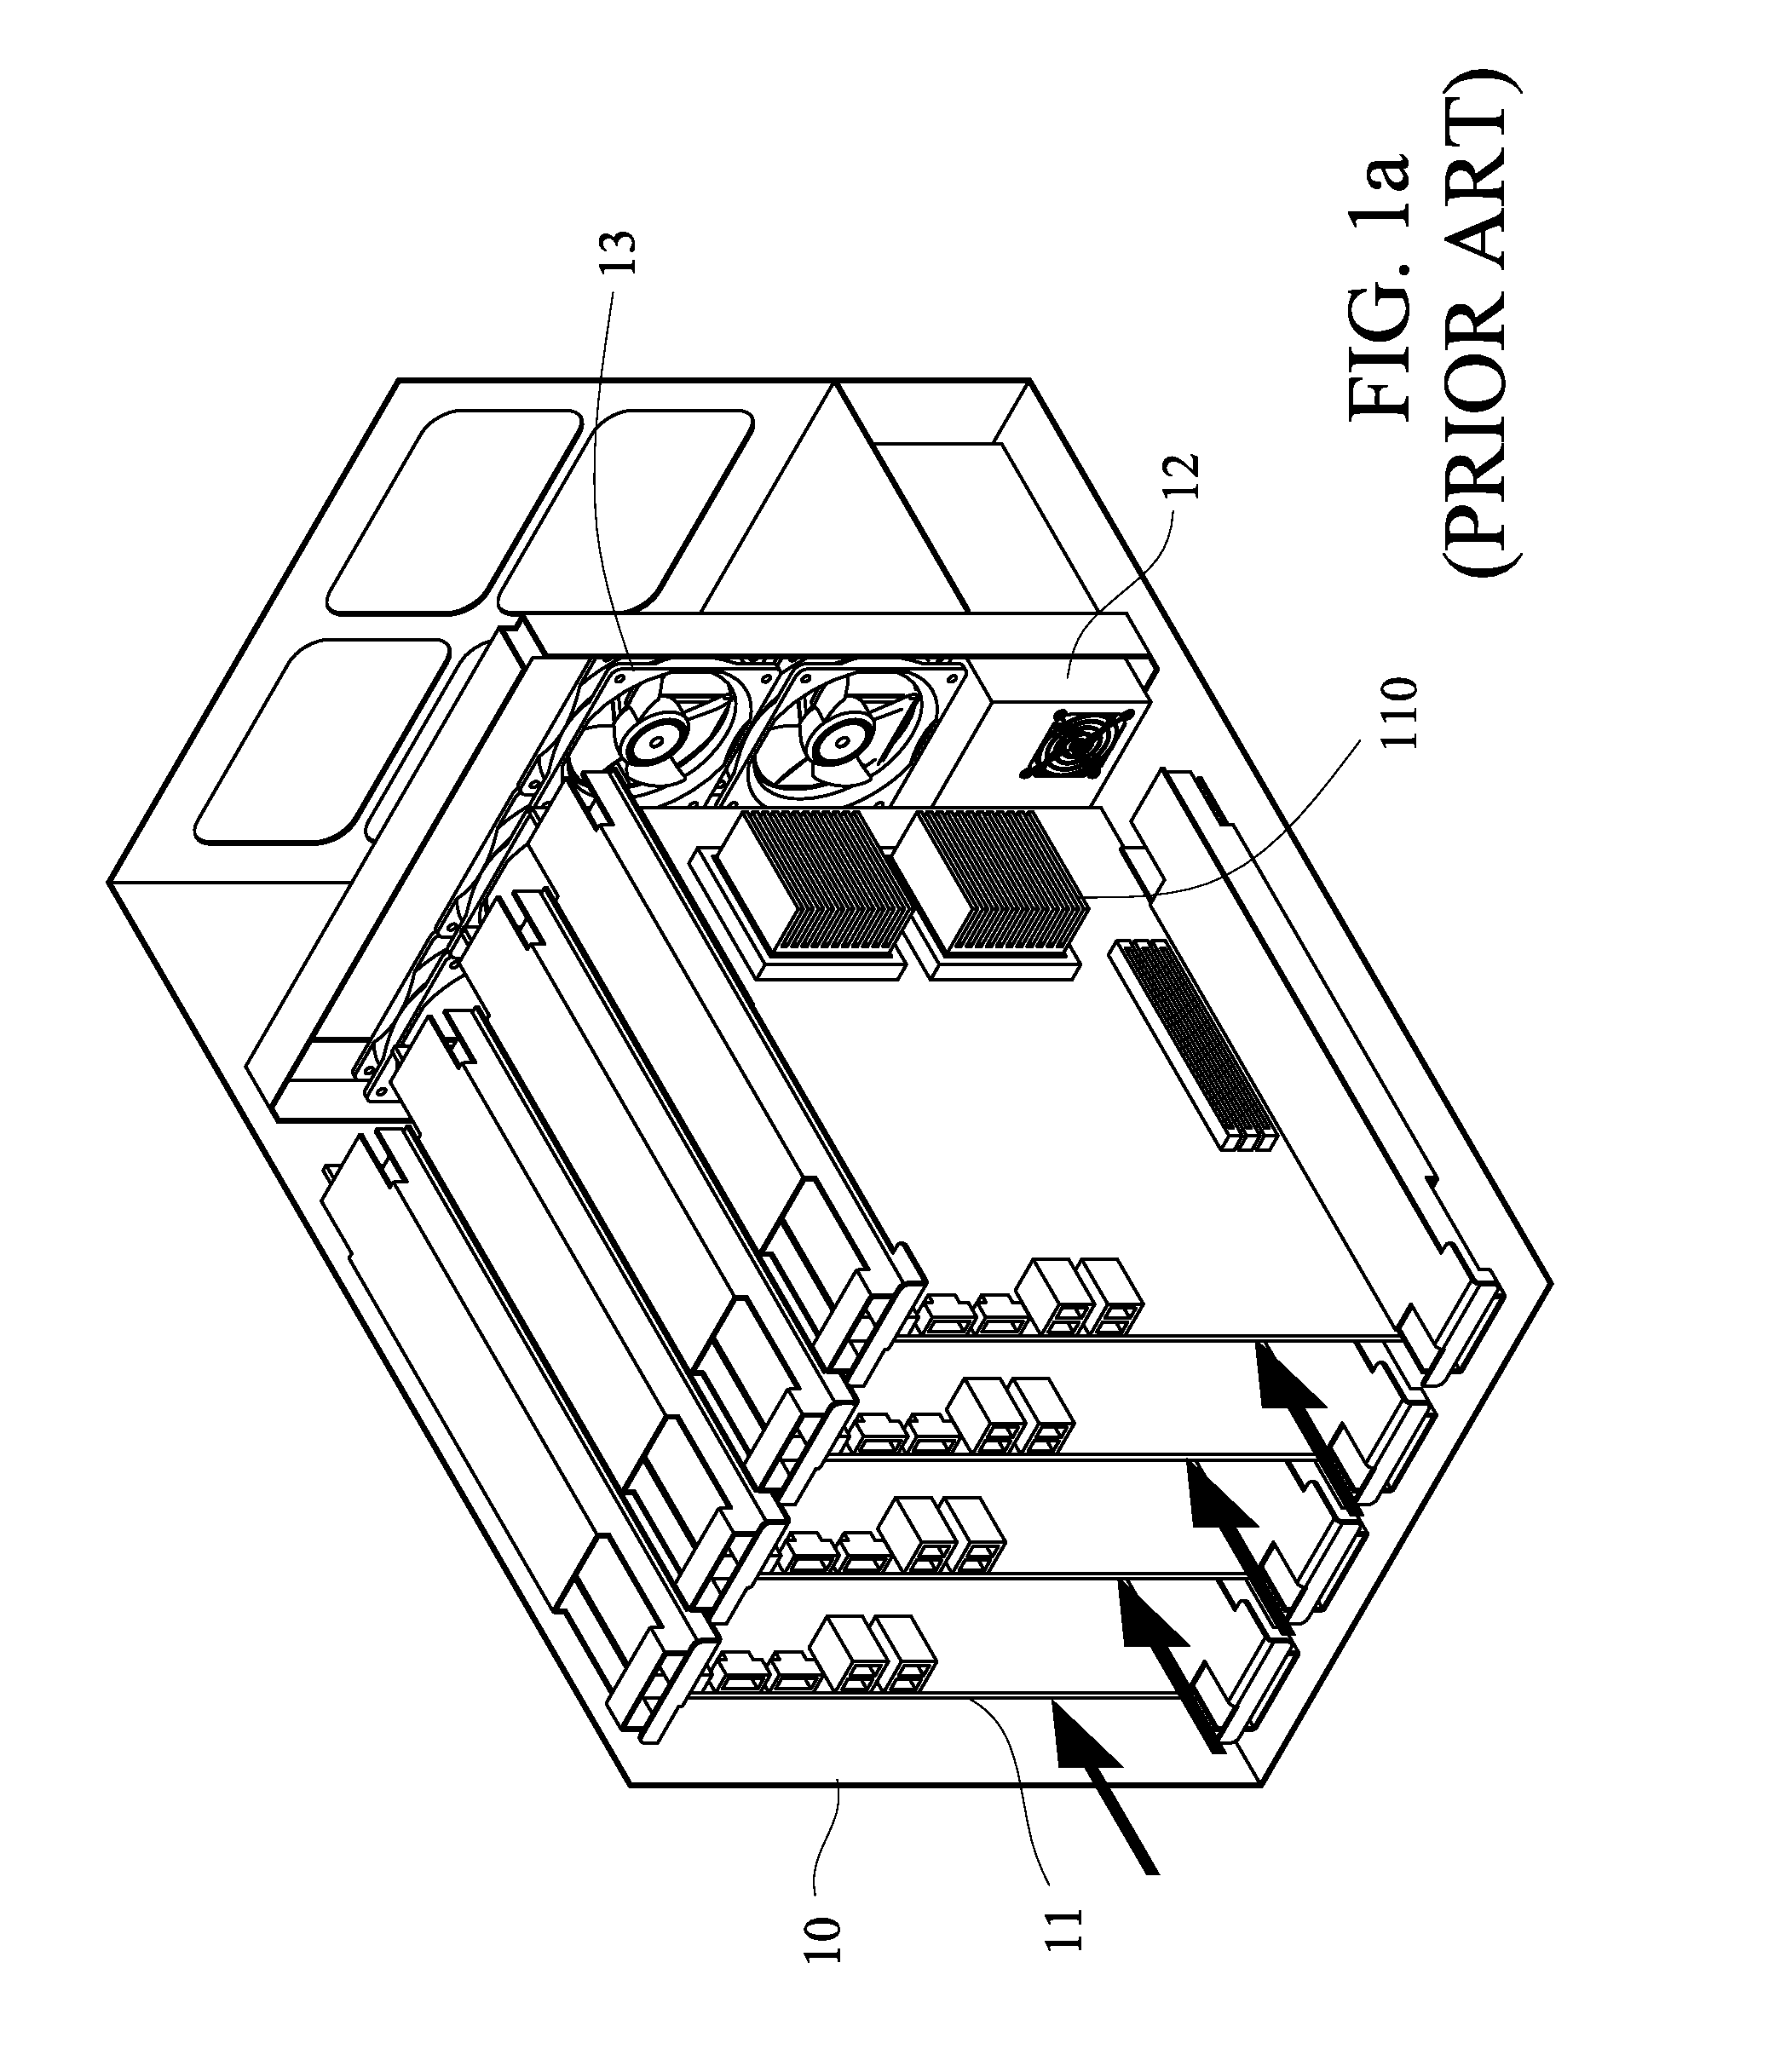 Chassis partition architecture for multi-processor system